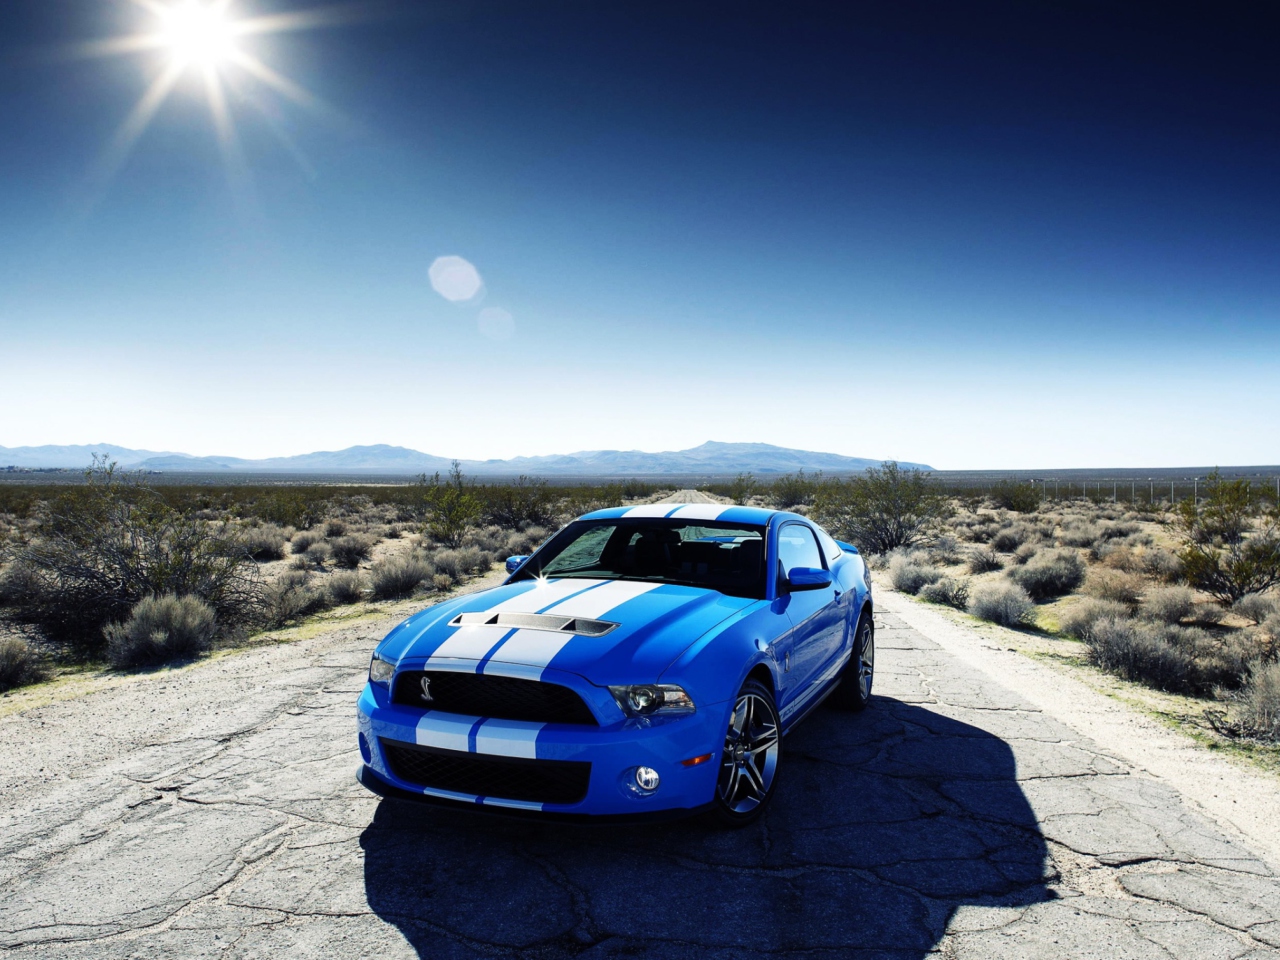 Das Ford Shelby Gt500 Wallpaper 1280x960